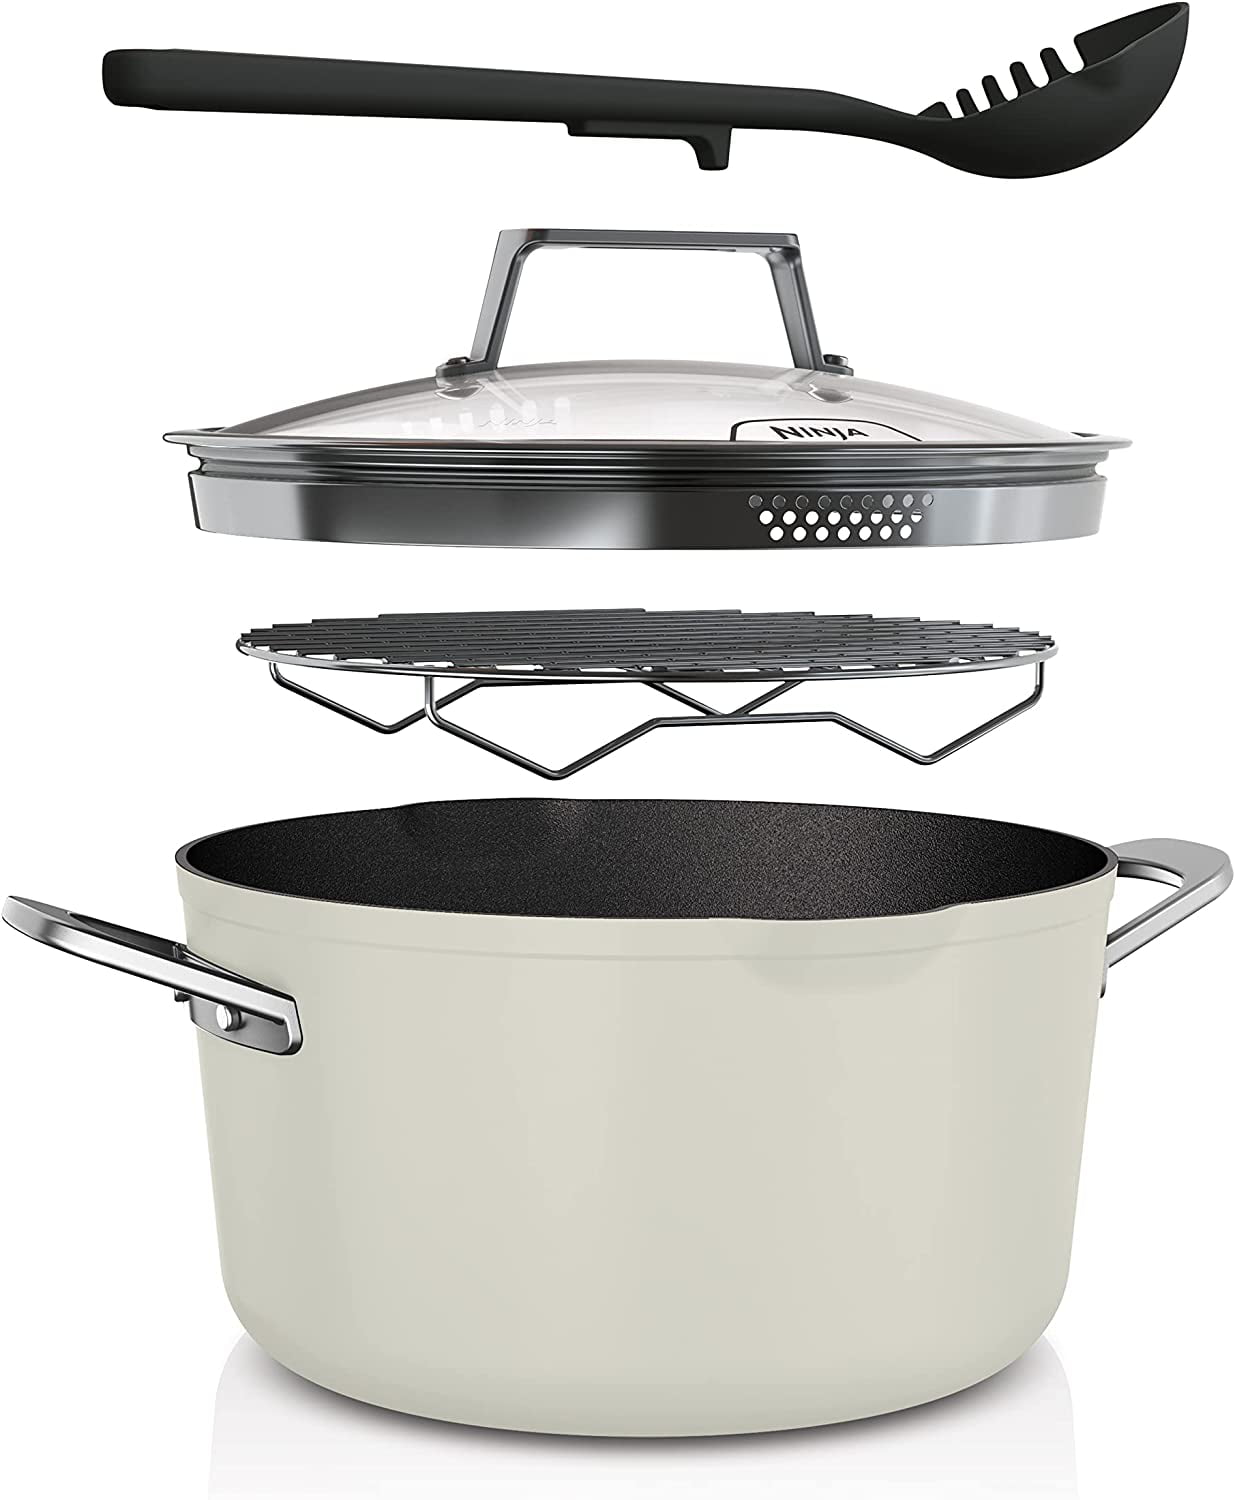 Ninja CW202GY Foodi NeverStick PossiblePot, Premium Set with 7-Quart  Capacity Pot, Roasting Rack, Glass Lid & Integrated Spoon, Nonstick,  Durable & Oven Safe to…